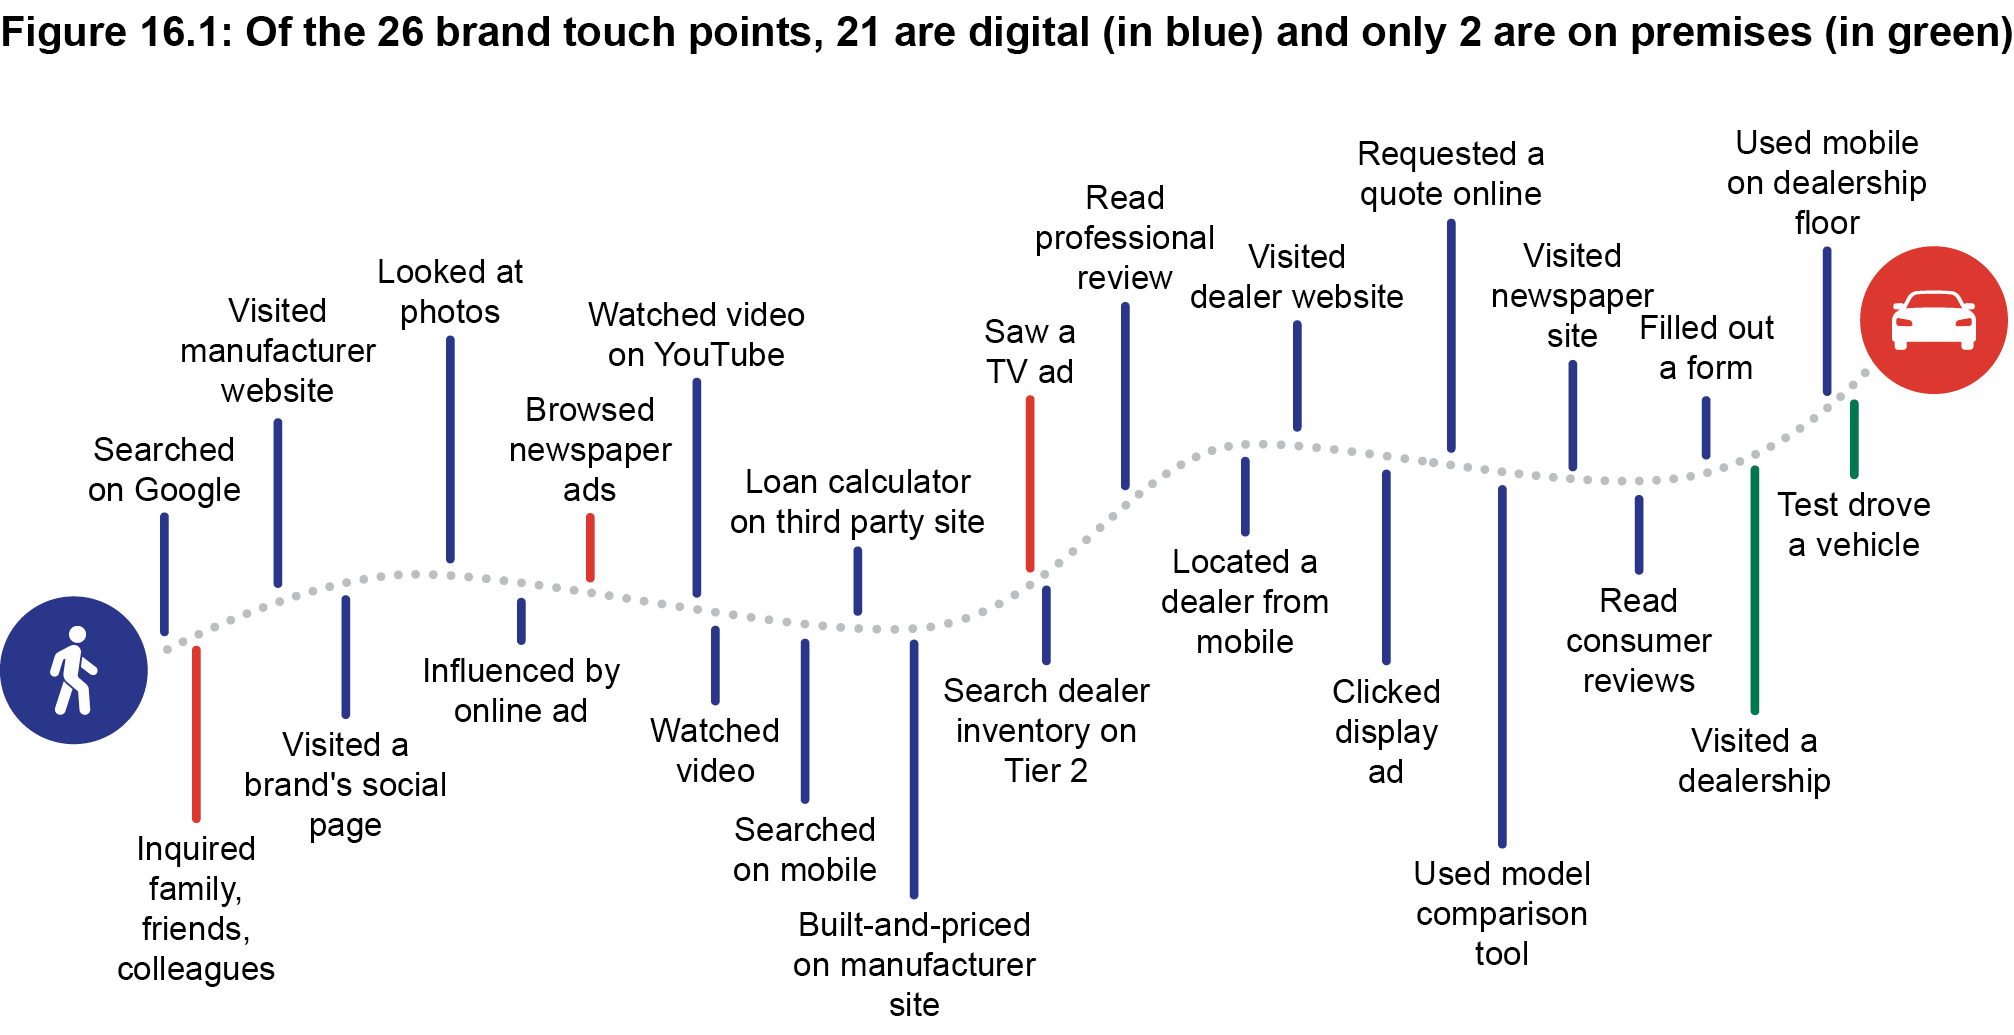 Figure 16.1: Of the 26 brand touch points, 21 are digital (in blue) and only 2 are on premises (in green)